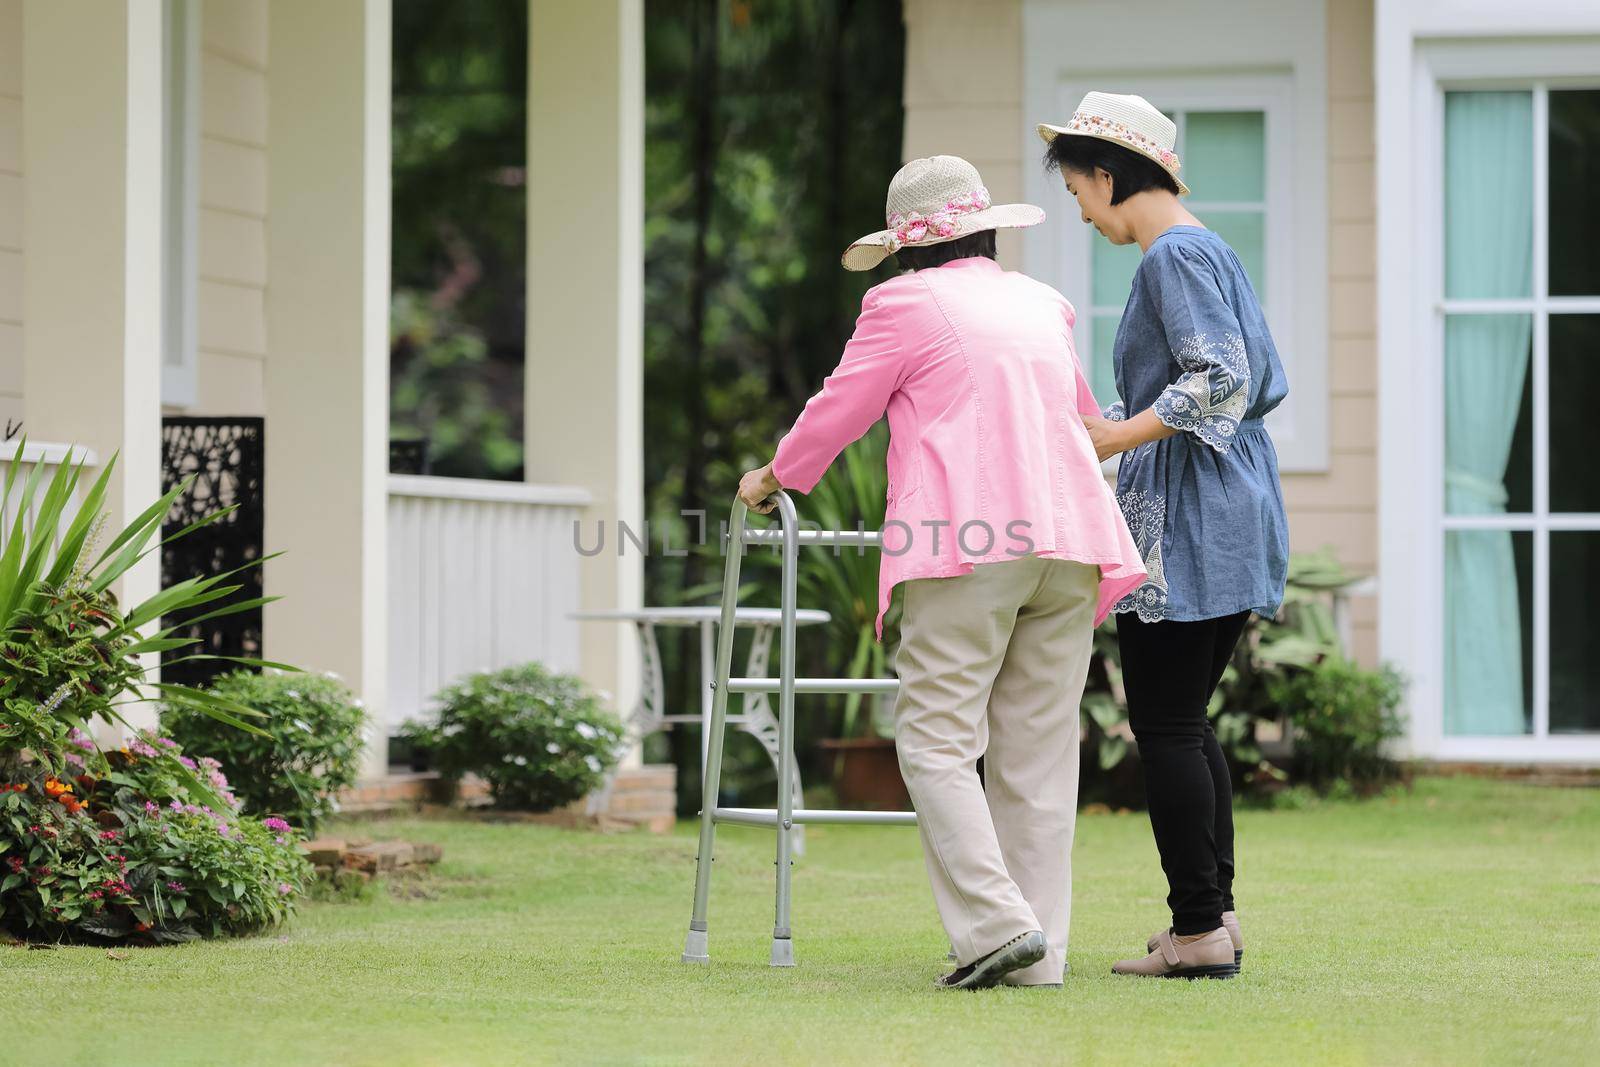 Elderly woman exercise walking in backyard with daughter by toa55